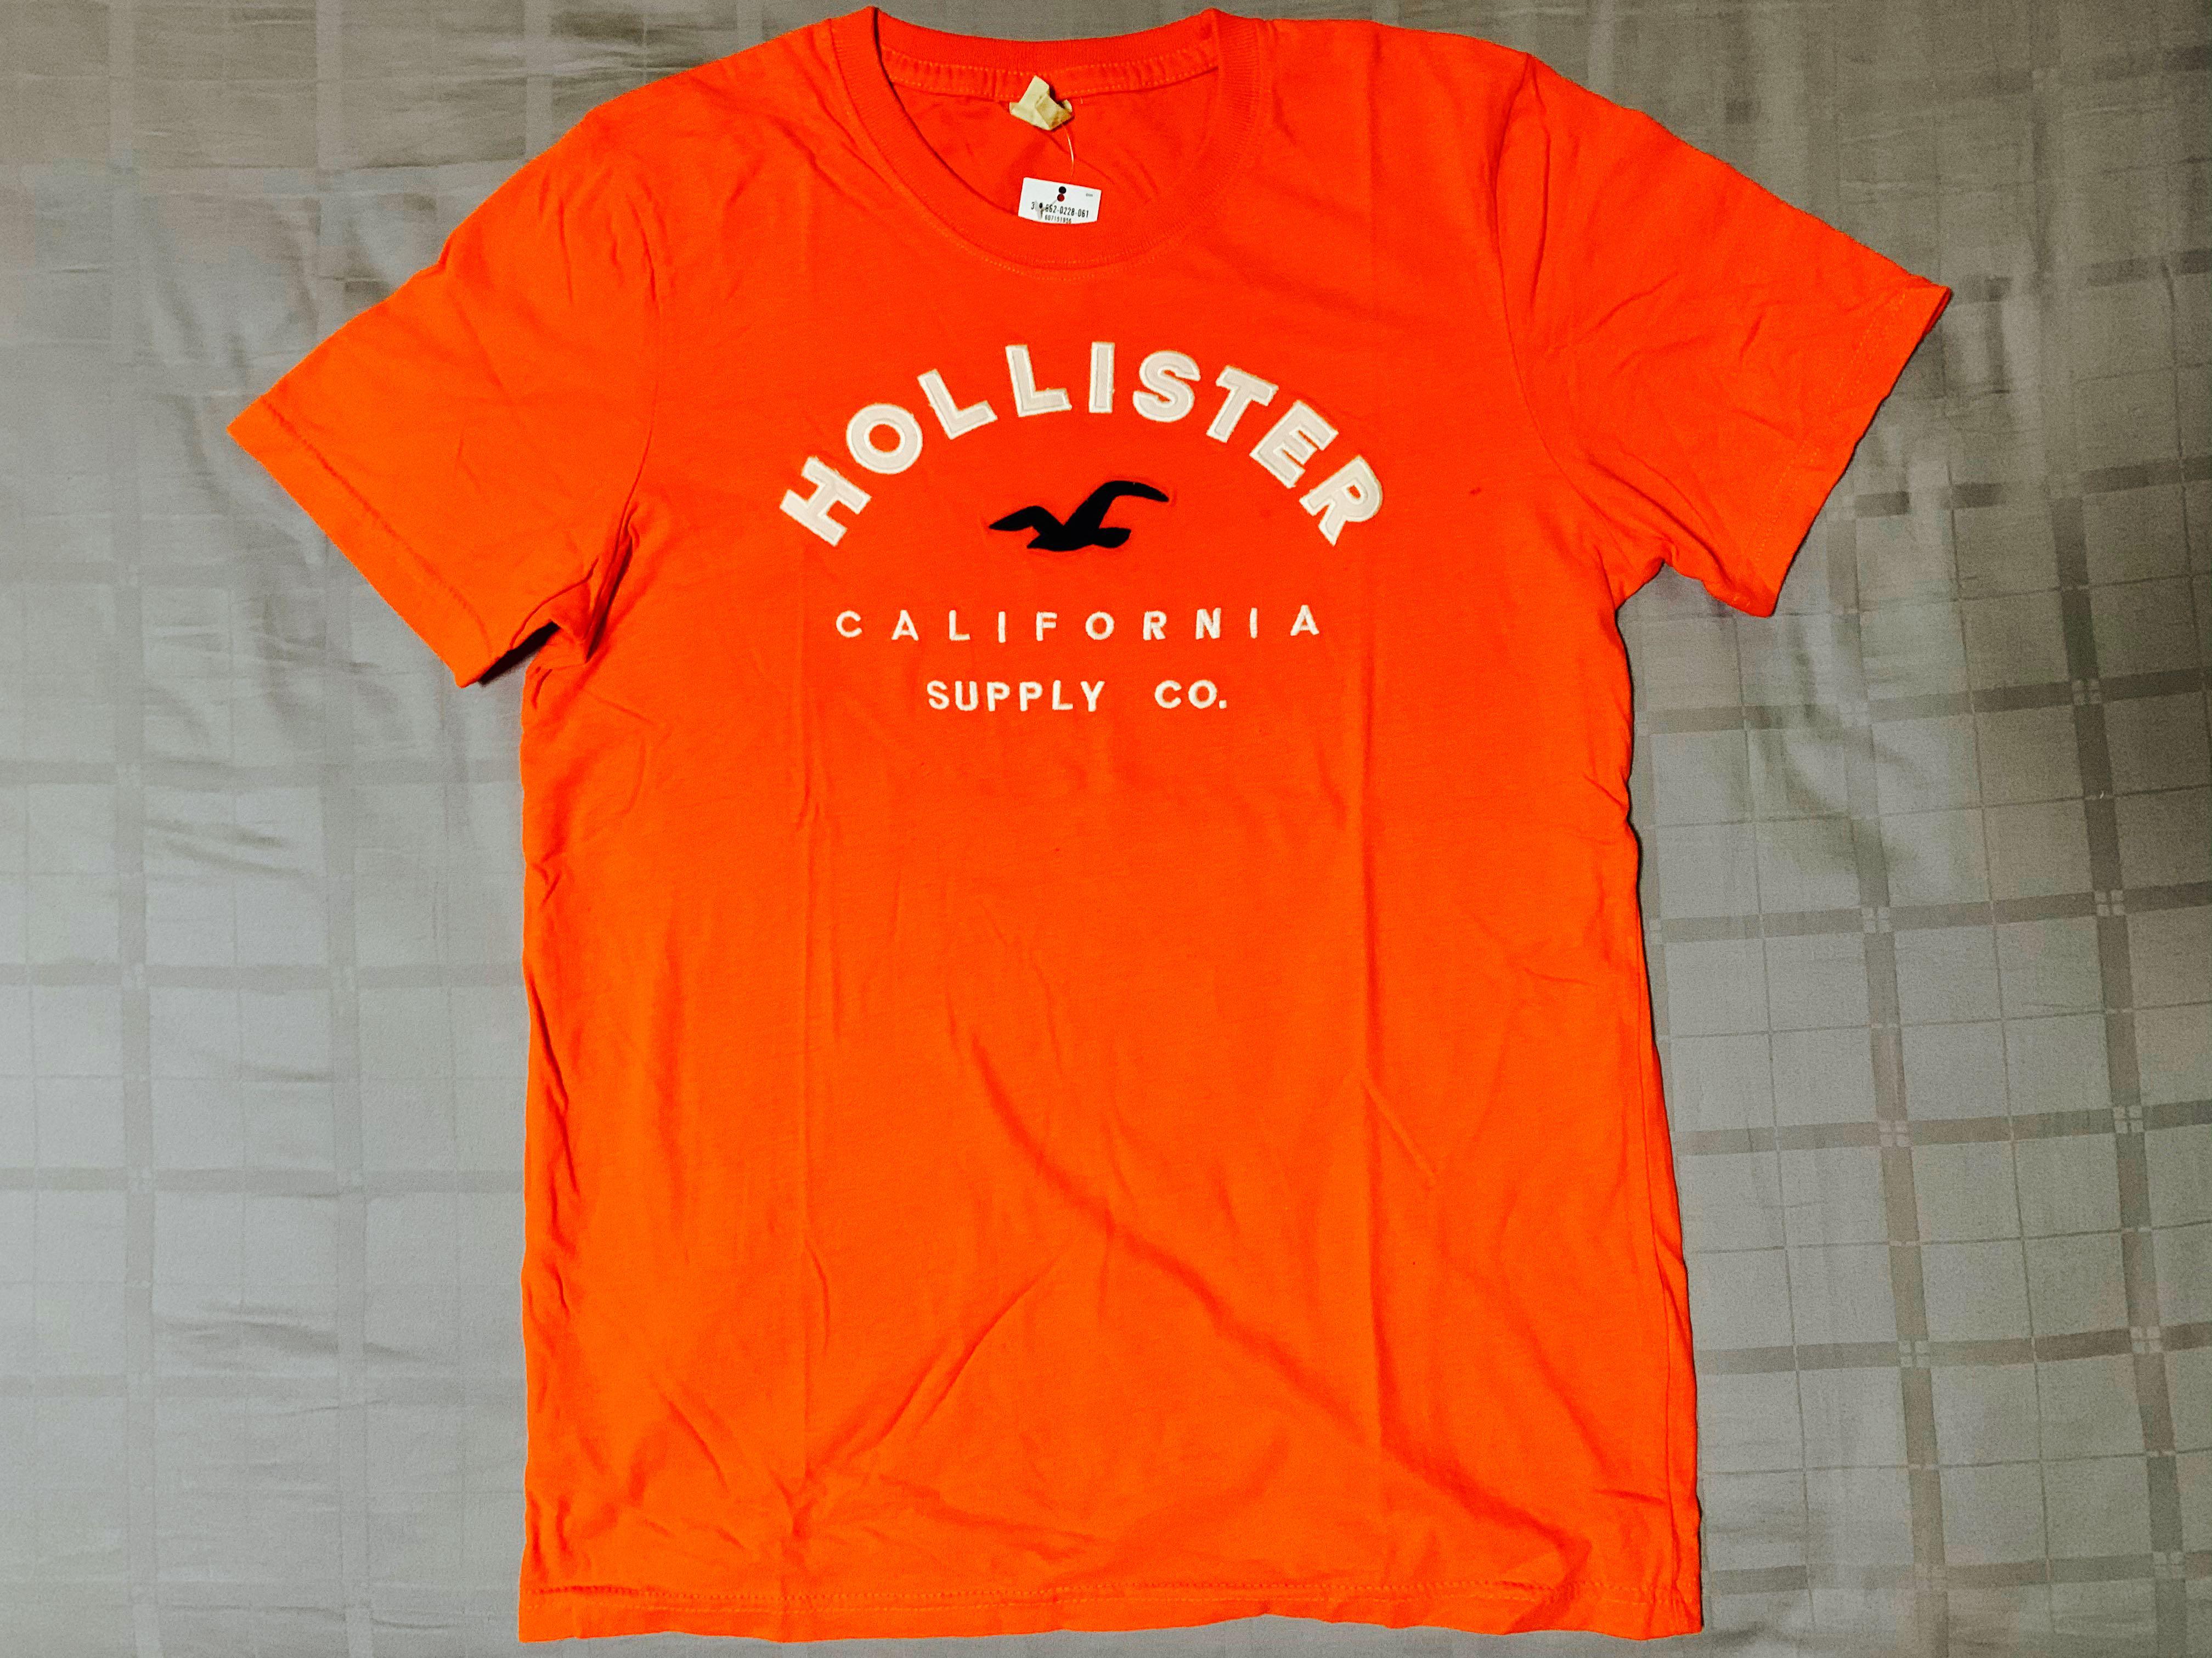 hollister mens graphic tees